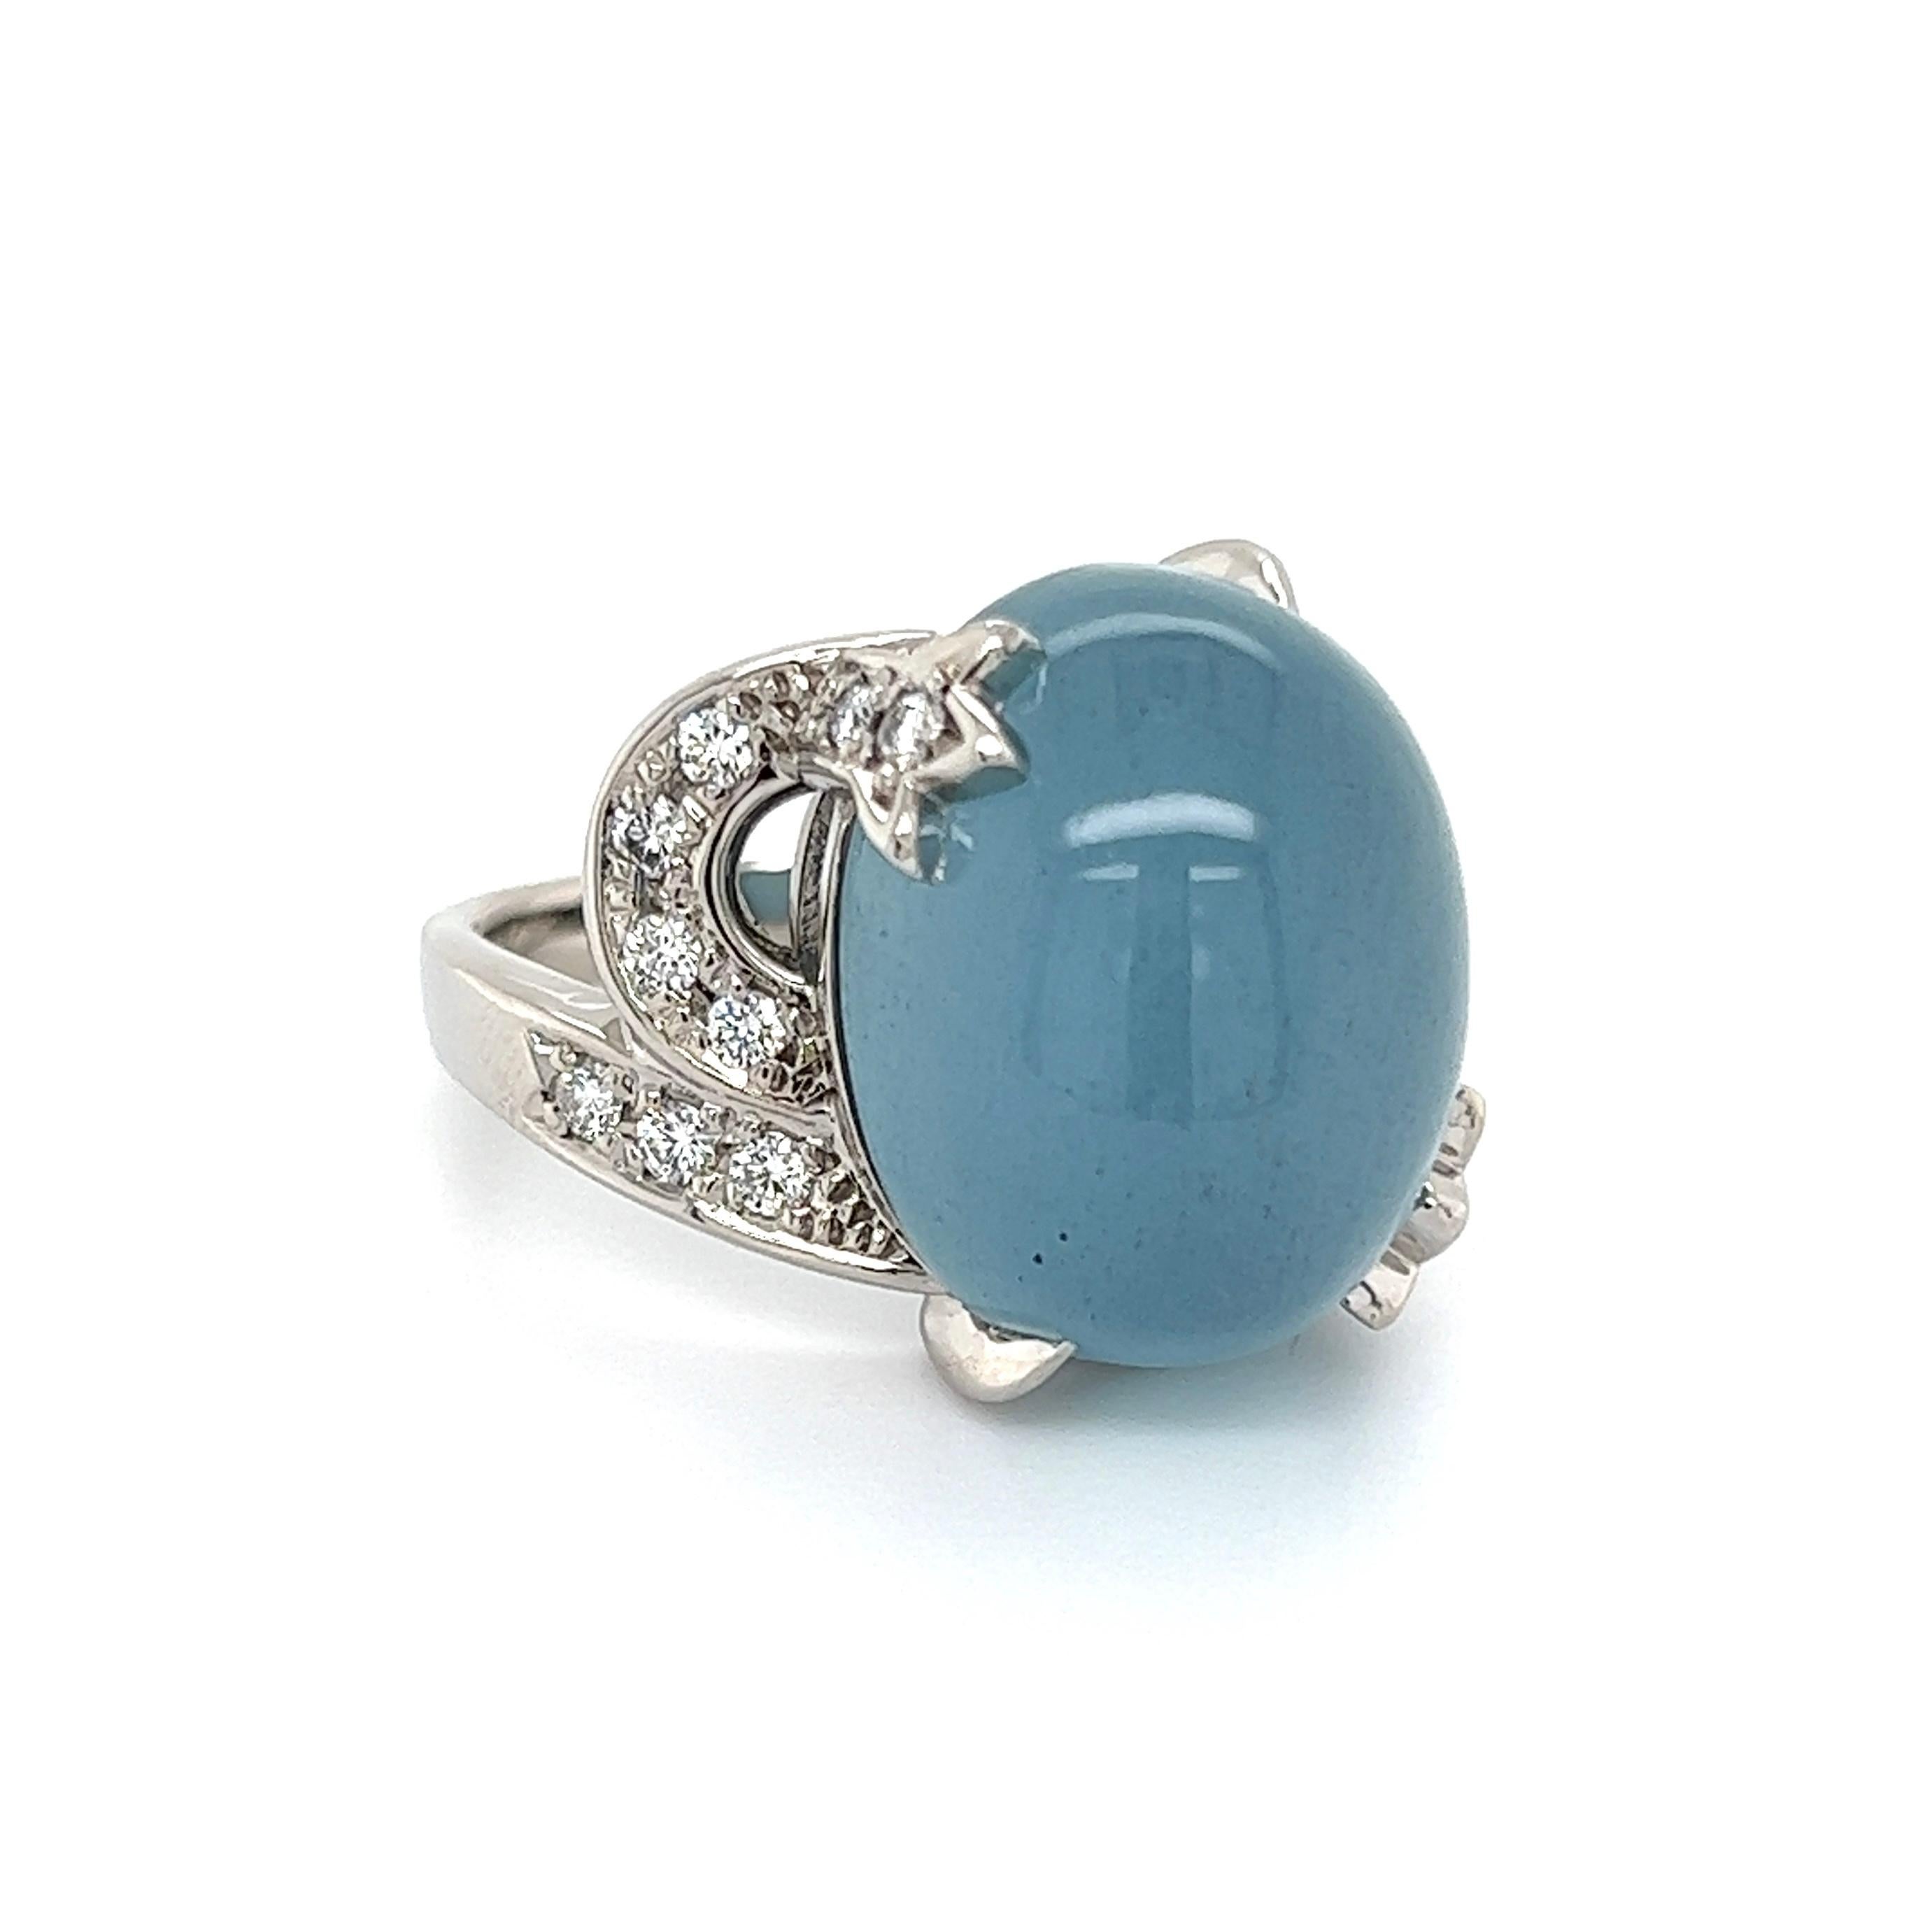 Simply Beautiful! Aquamarine and Diamond Cocktail Ring. Centering a securely nestled Hand set Cabochon Aquamarine enhanced with Diamonds on either side, weighing approx. 0.28tcw. Hand crafted Platinum mounting. Dimensions: 1.19: l x 0.83” w x 0.68”